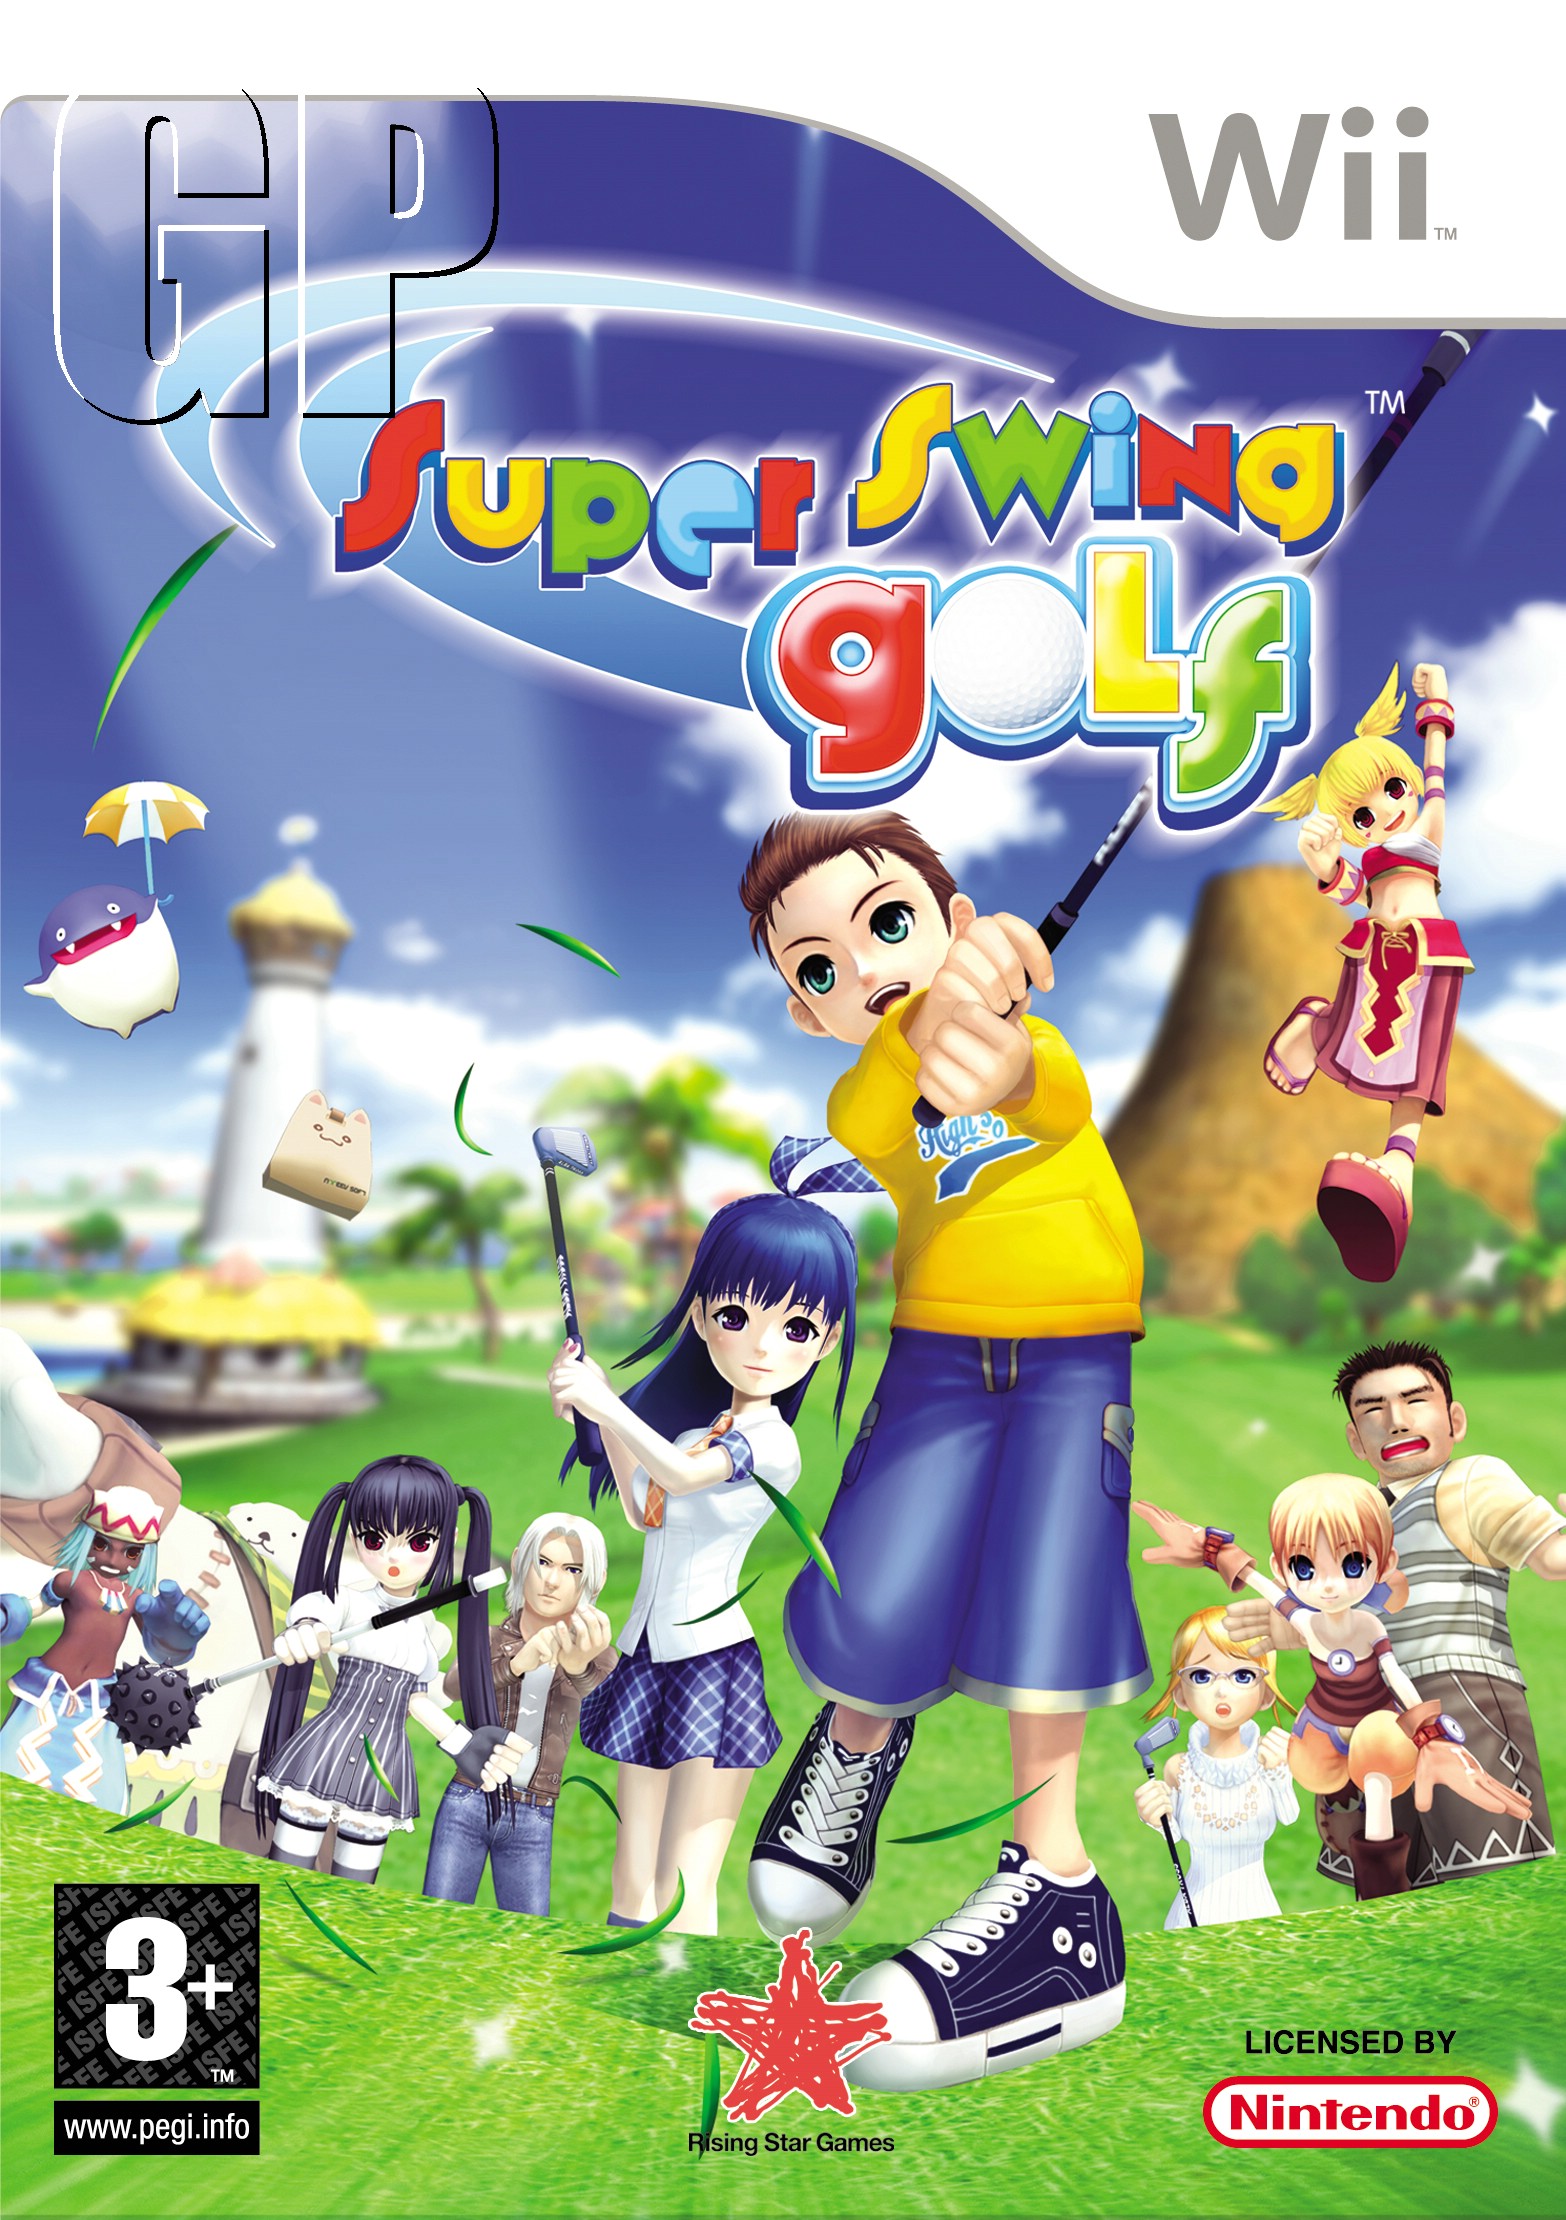 Wii Golf Game Reviews